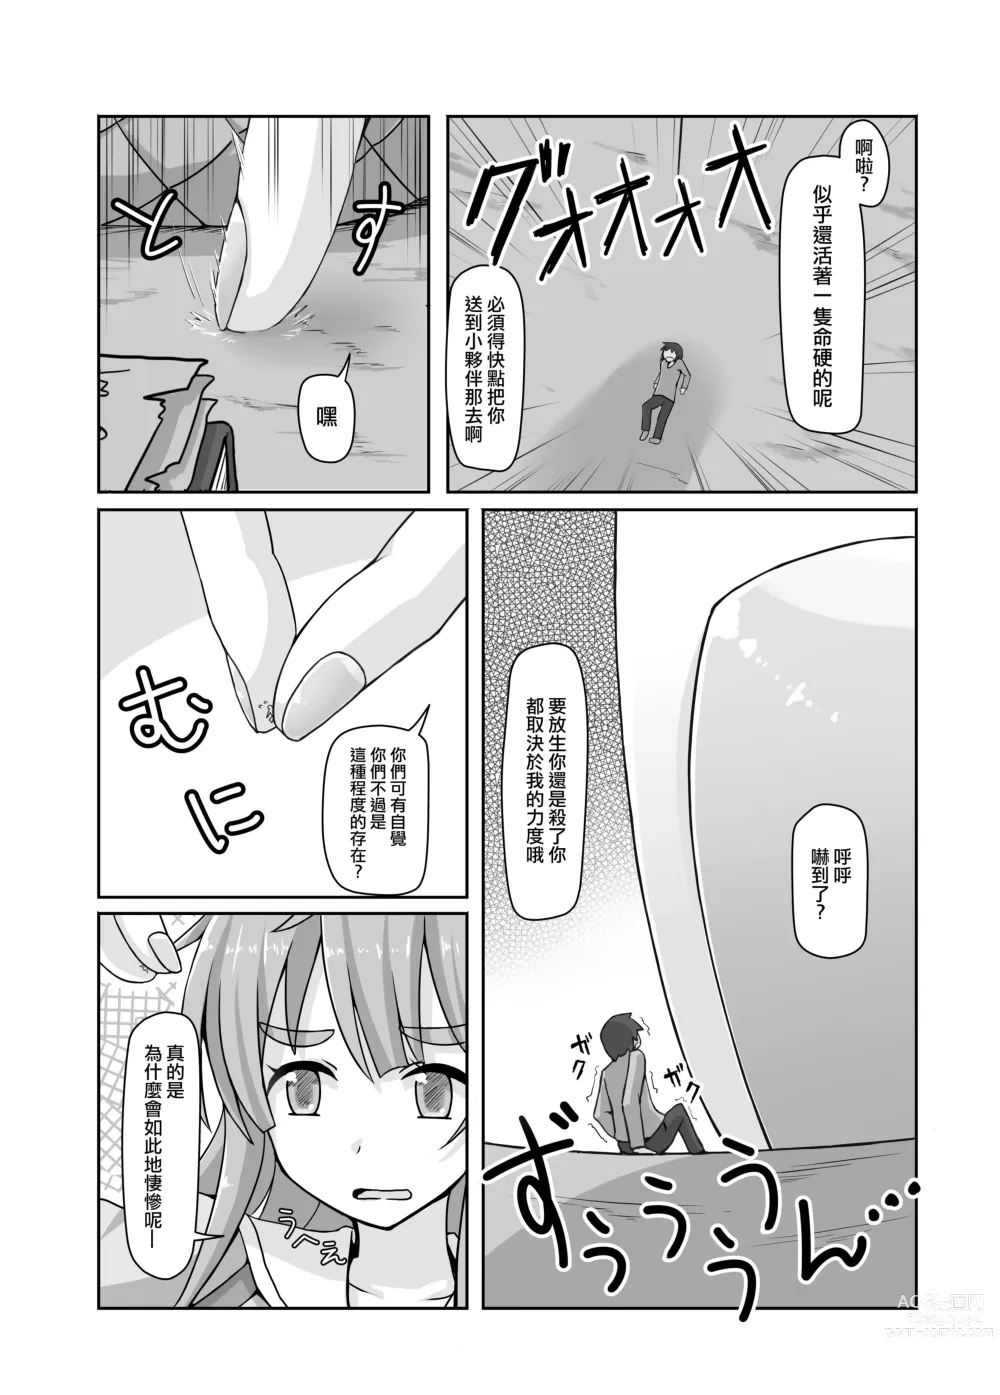 Page 7 of doujinshi 小小人類就由我來衰退